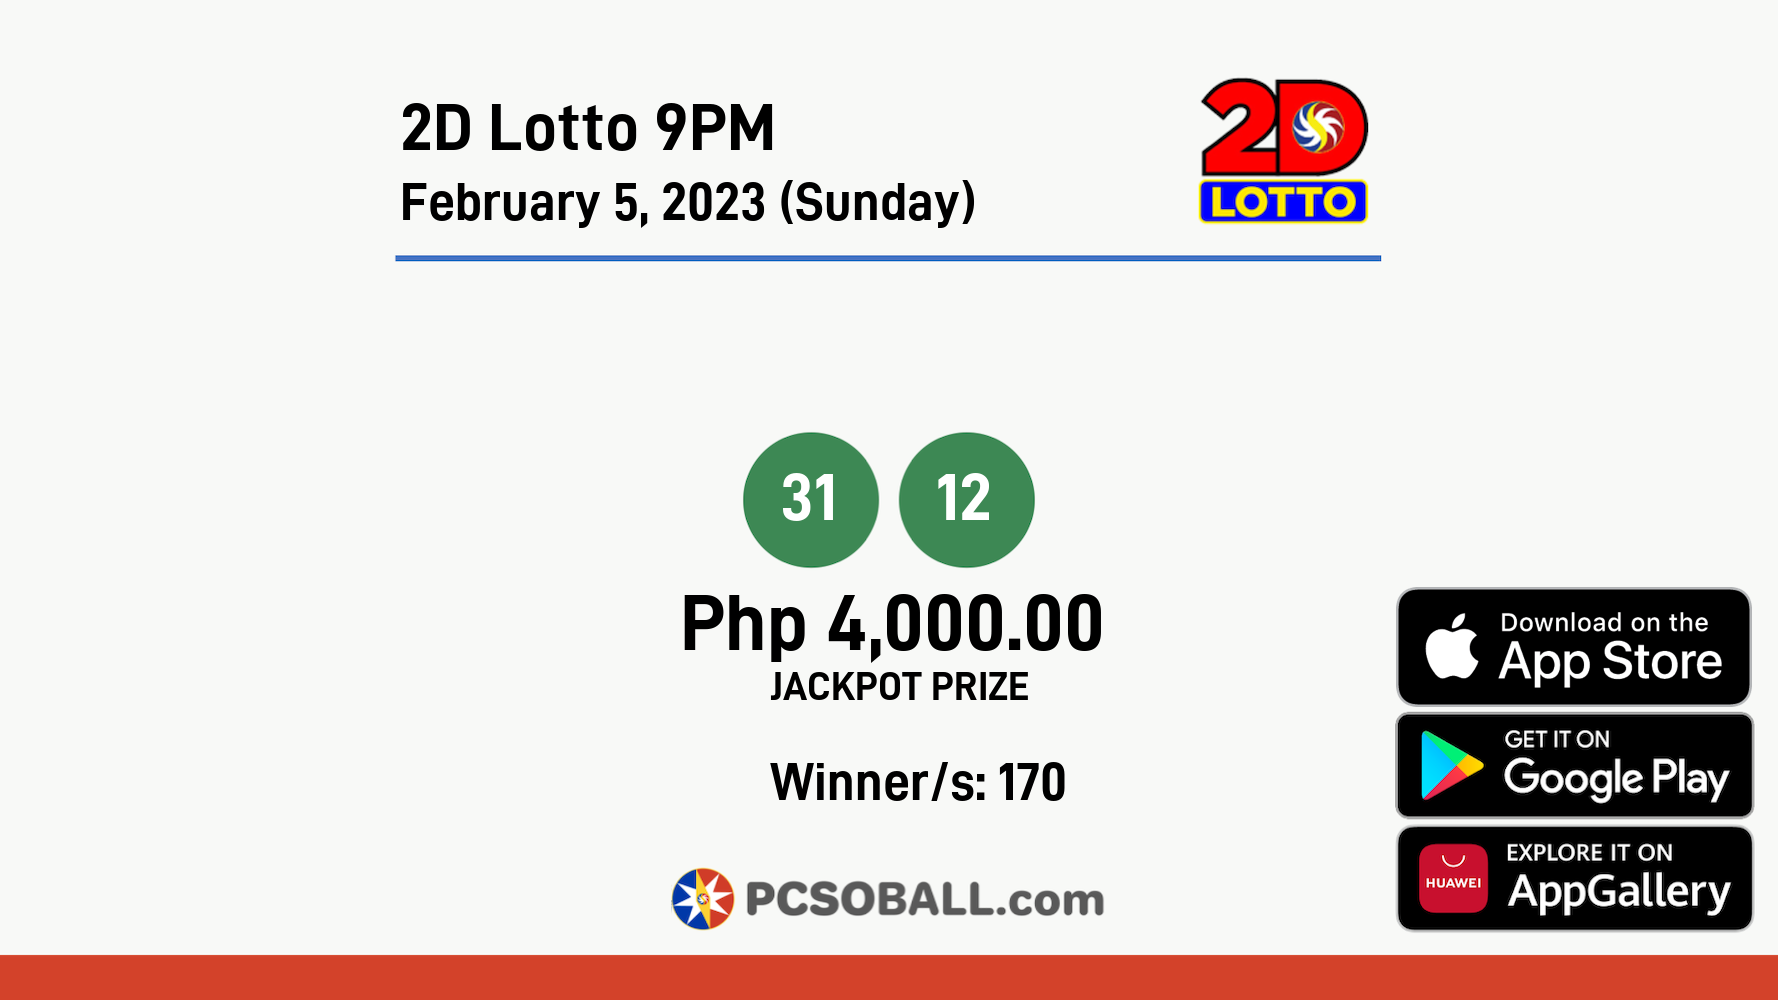 2D Lotto 9PM February 5, 2023 (Sunday) Result